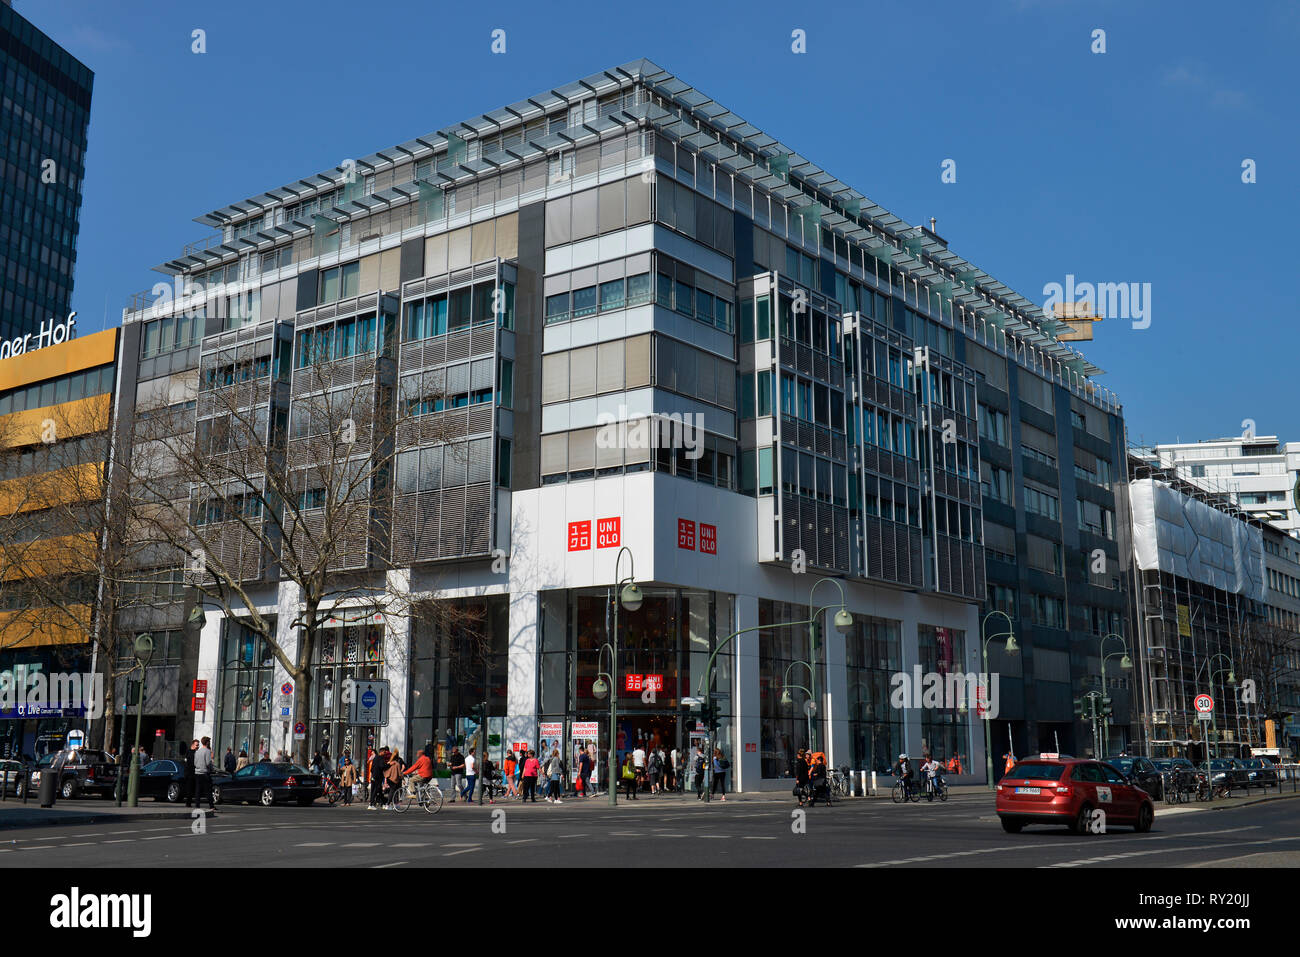 Uniqlo Department Store High Resolution Stock Photography and Images - Alamy